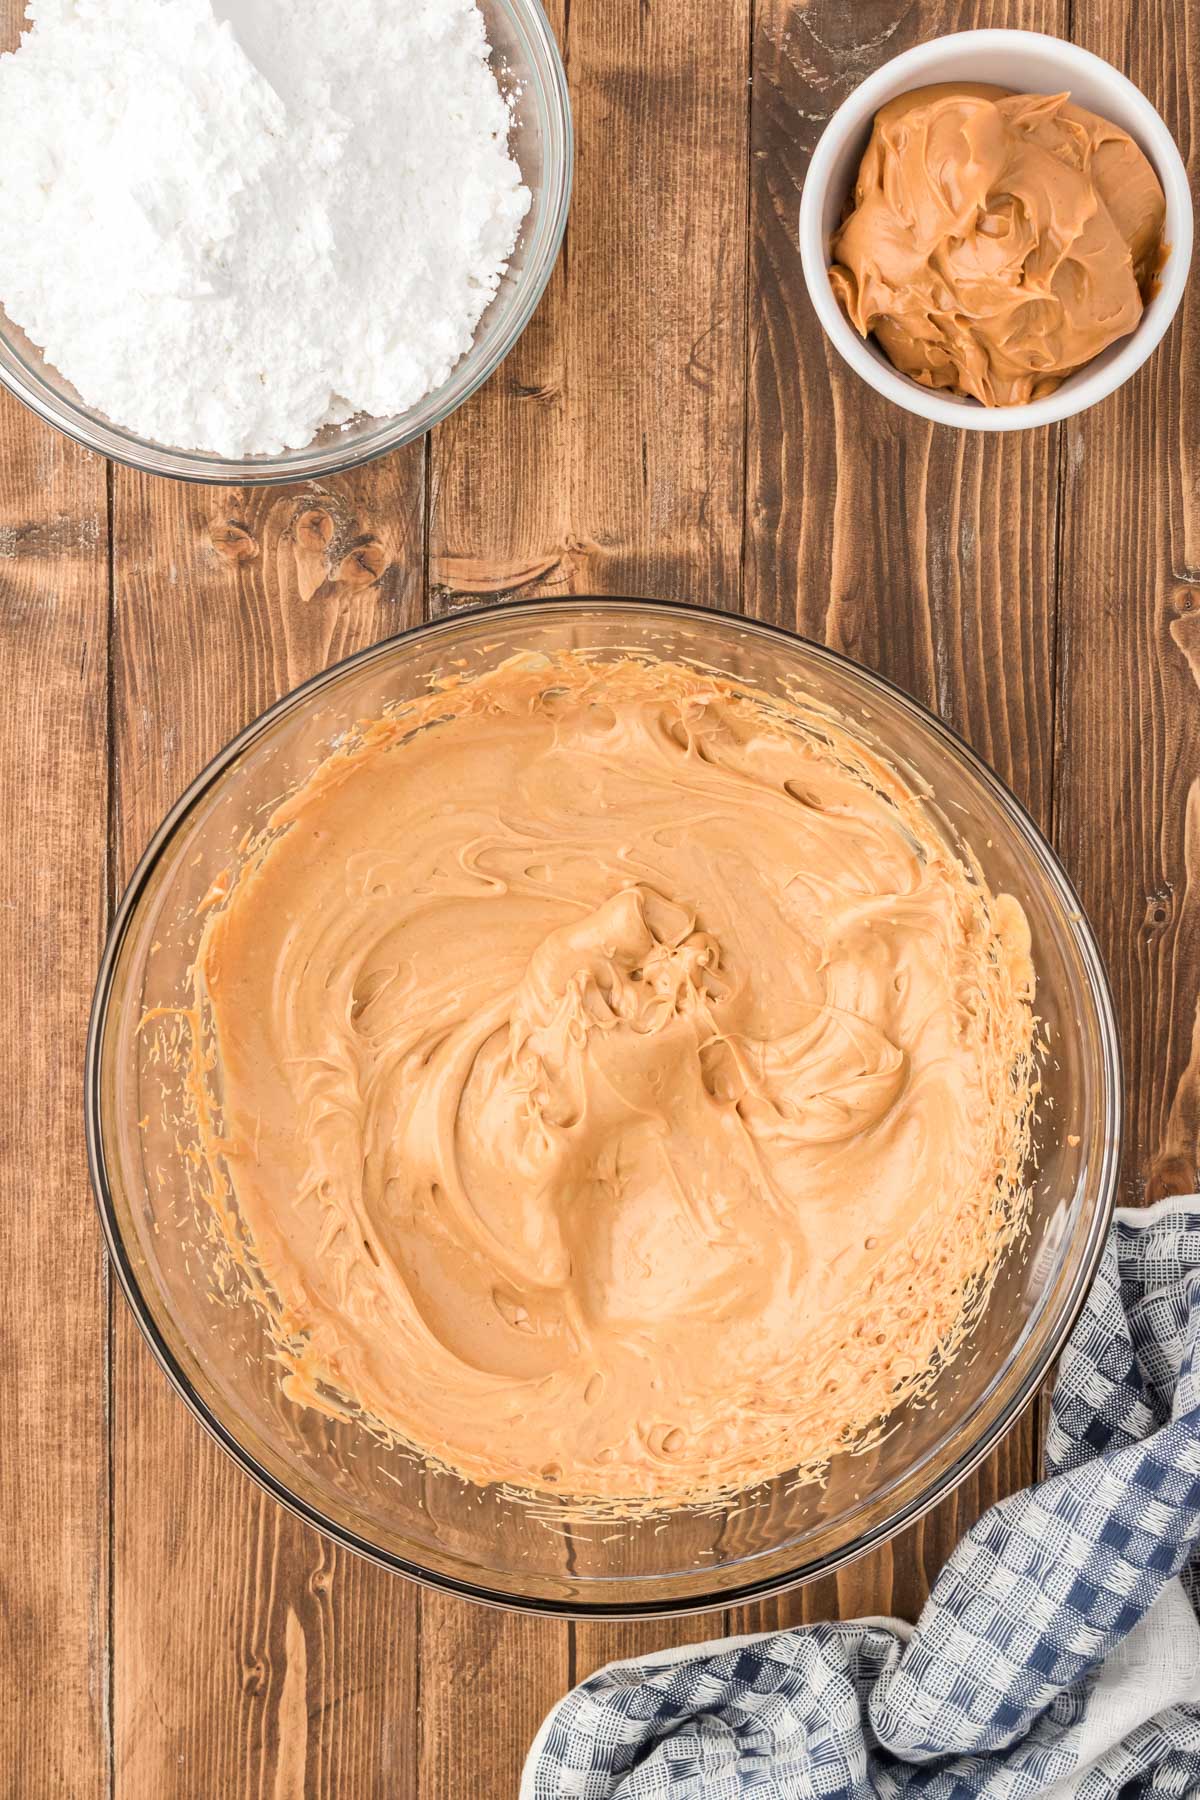 Peanut butter, butter, and vanilla mixed in a glass mixing bowl.